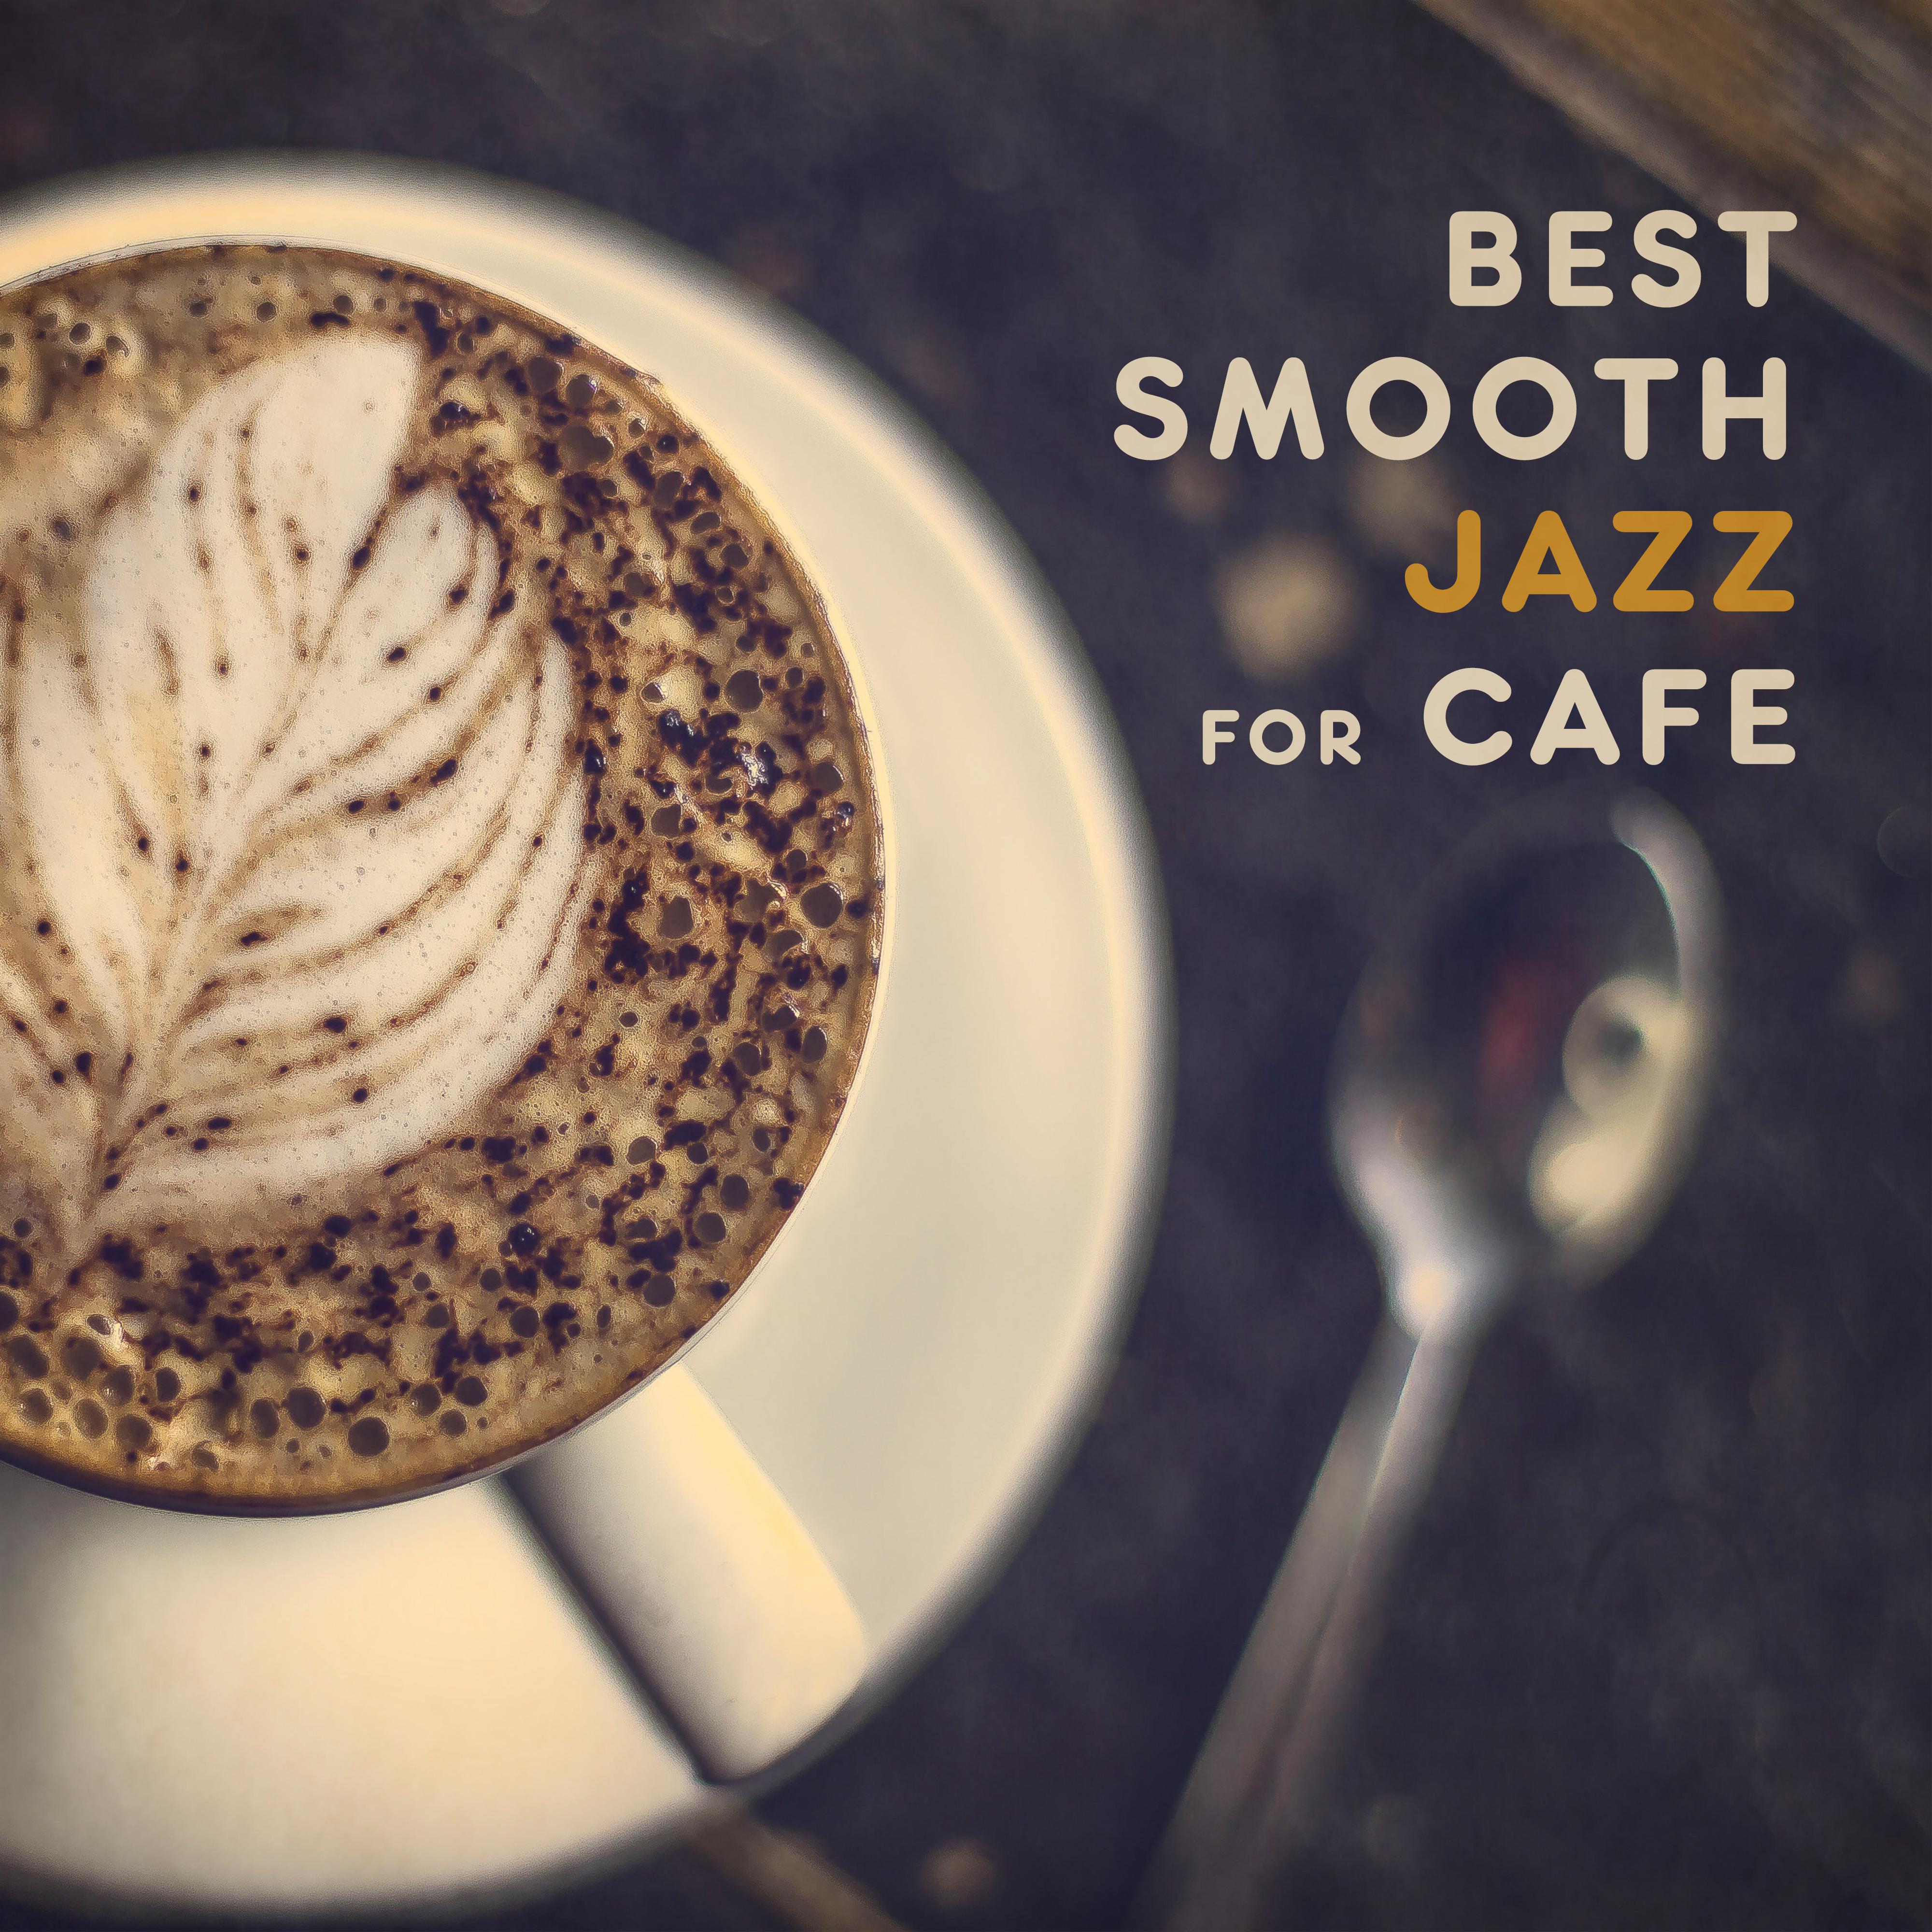 Best Smooth Jazz for Cafe – Restaurant Music, Stress Relief, Gentle Guitar, Piano Relaxation, Cocktail Party, Jazz Cafe